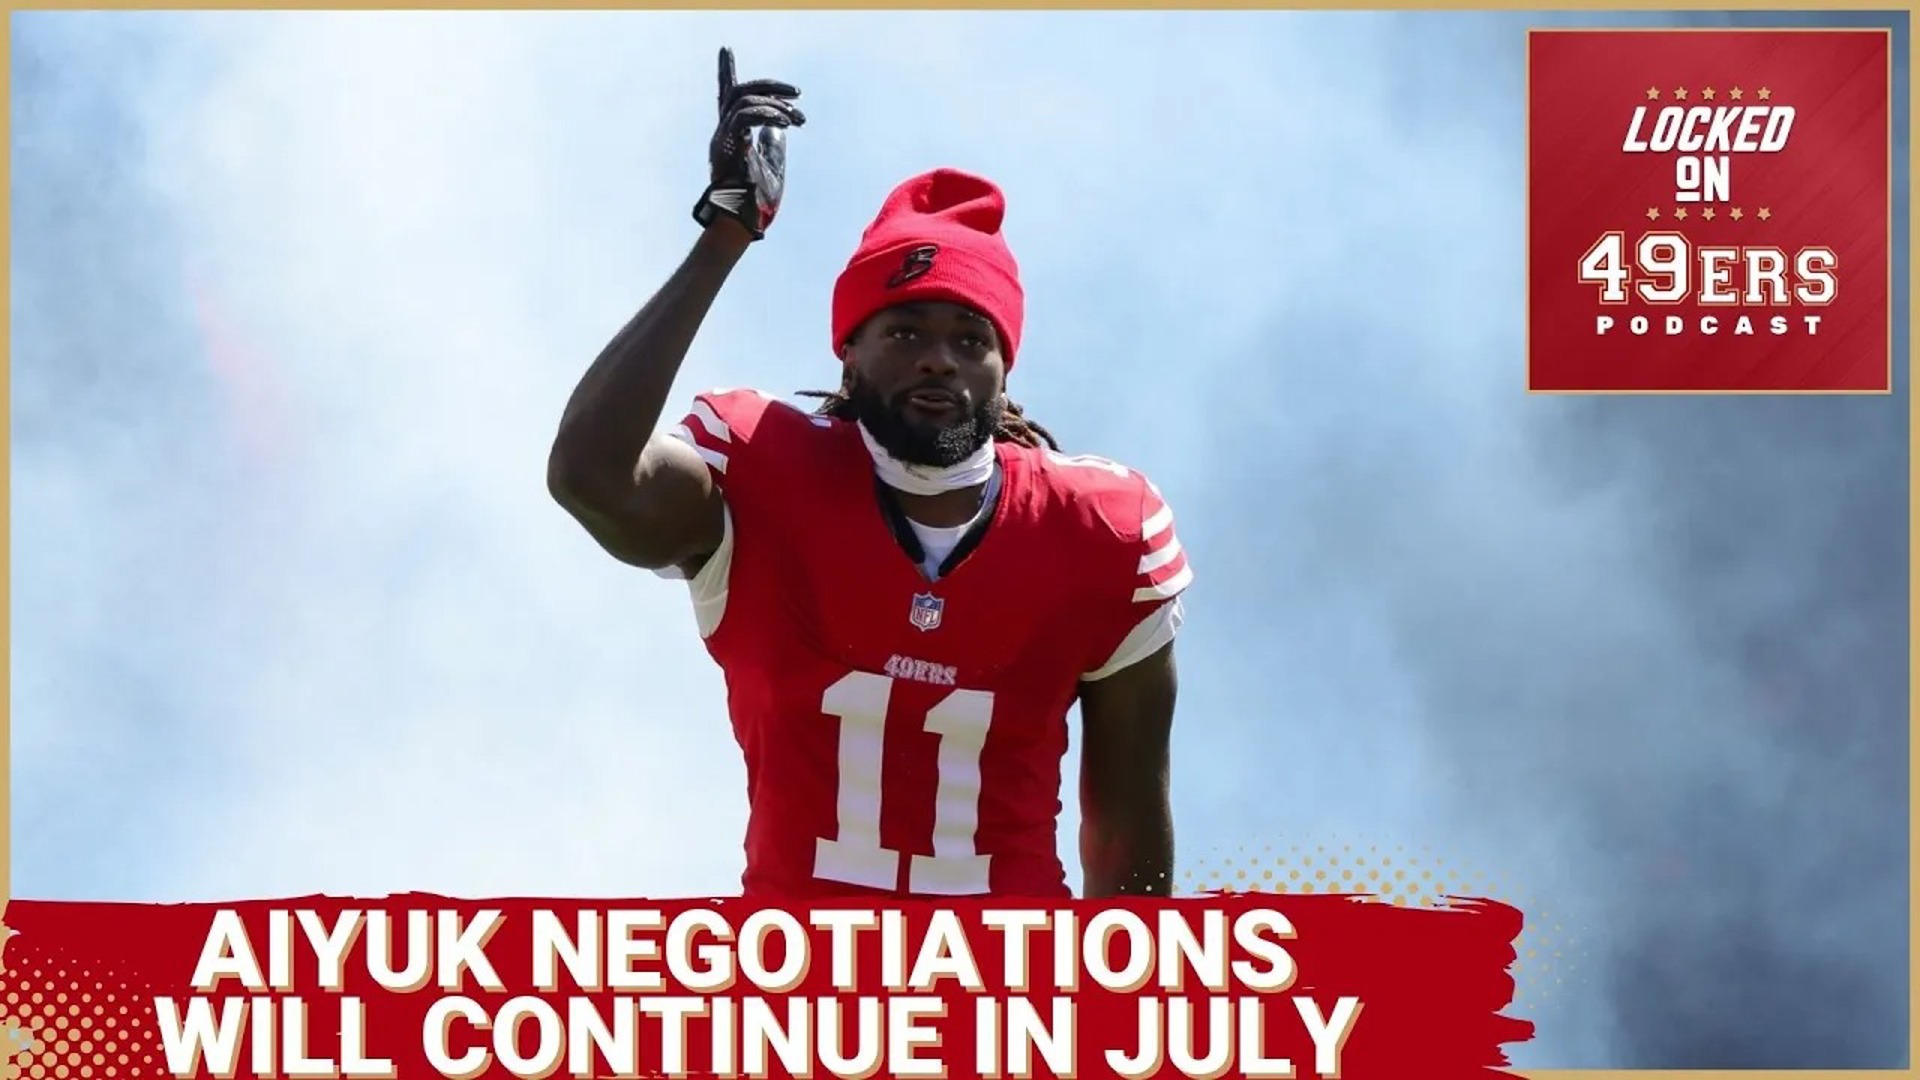 Brandon Aiyuk's meeting reportedly went "good" with the San Francisco 49ers and negotiations are expected to continue in July.